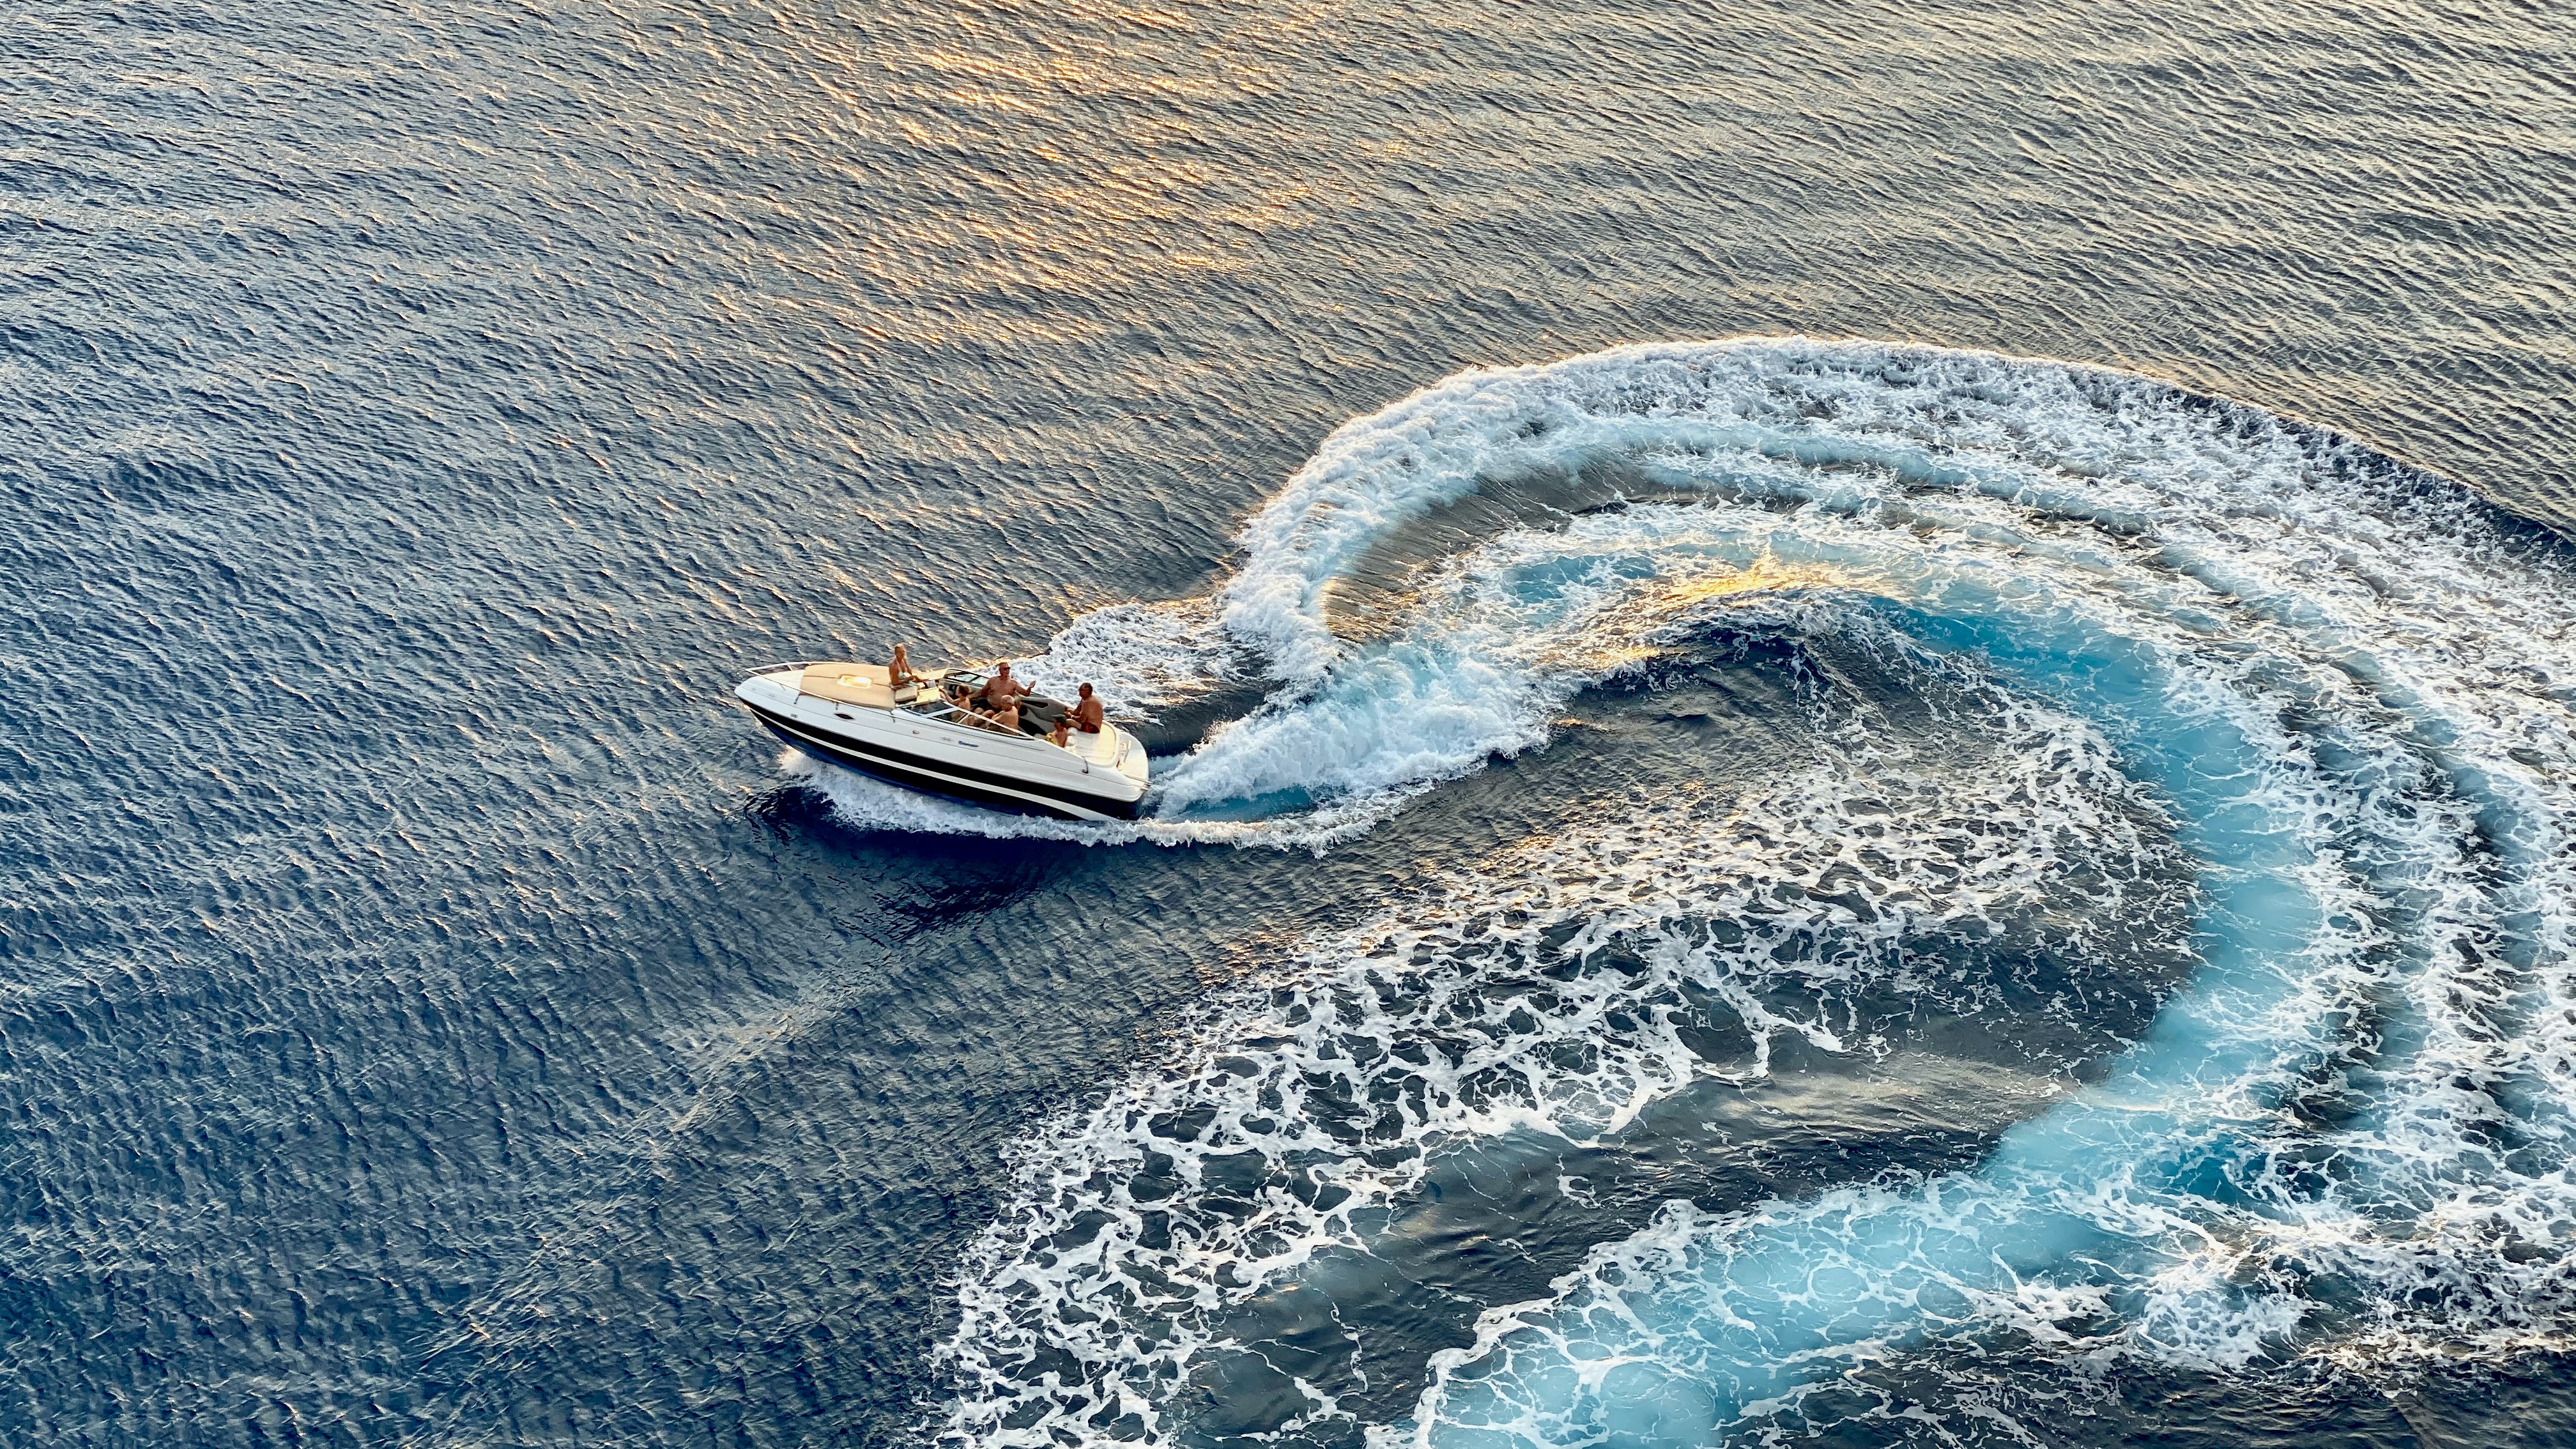 Facing charges of Boating While Under the Influence?